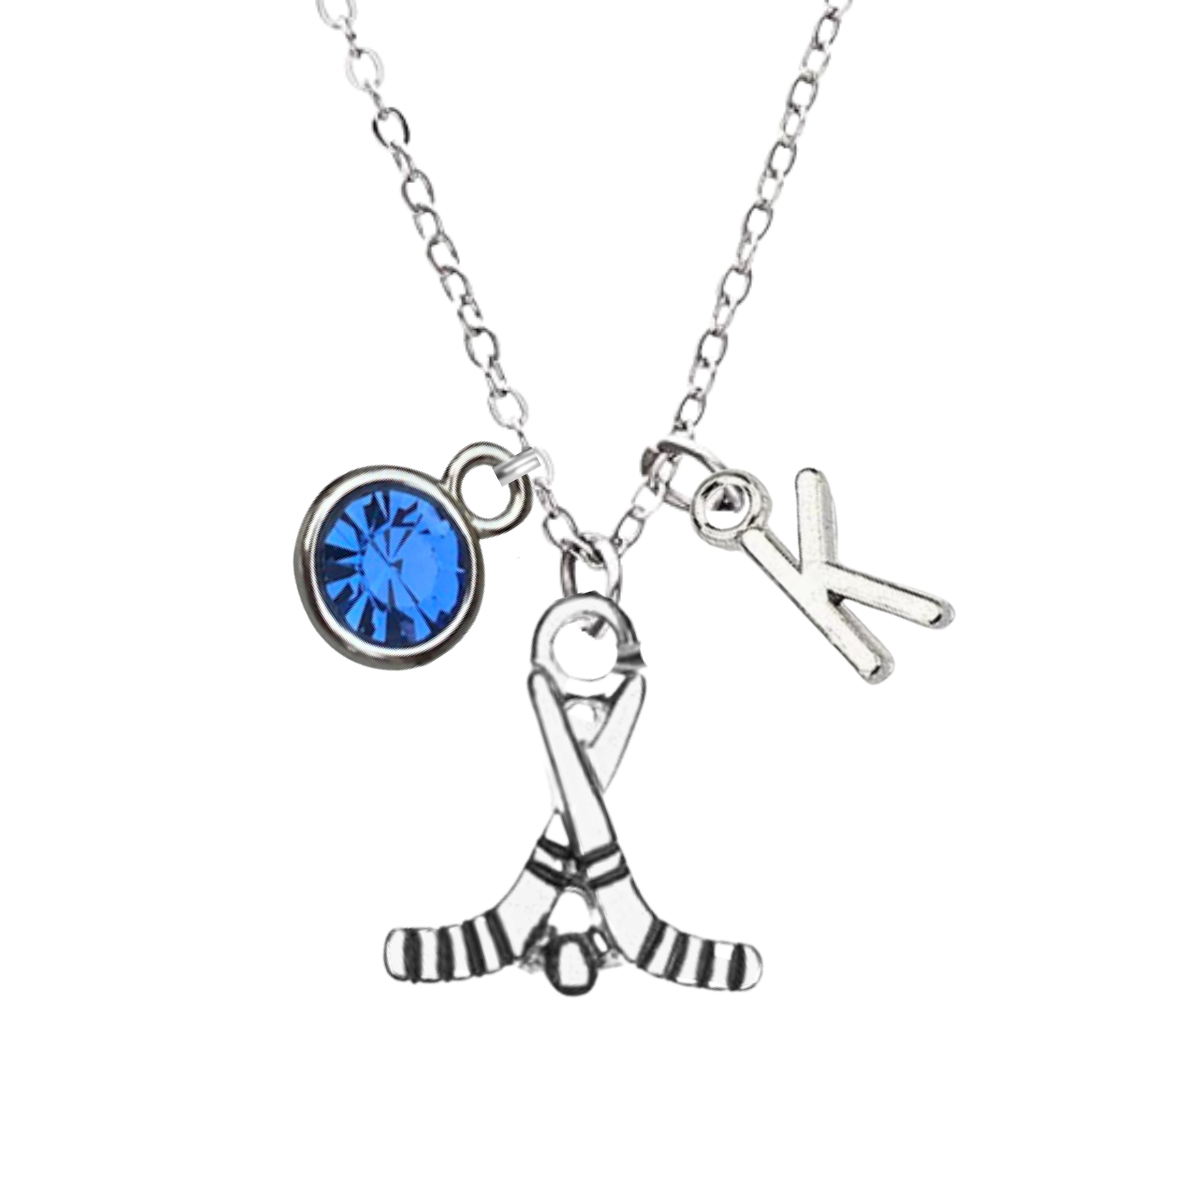 Personalized Ice Hockey Stick Necklace with Letter & Birthstone Charm